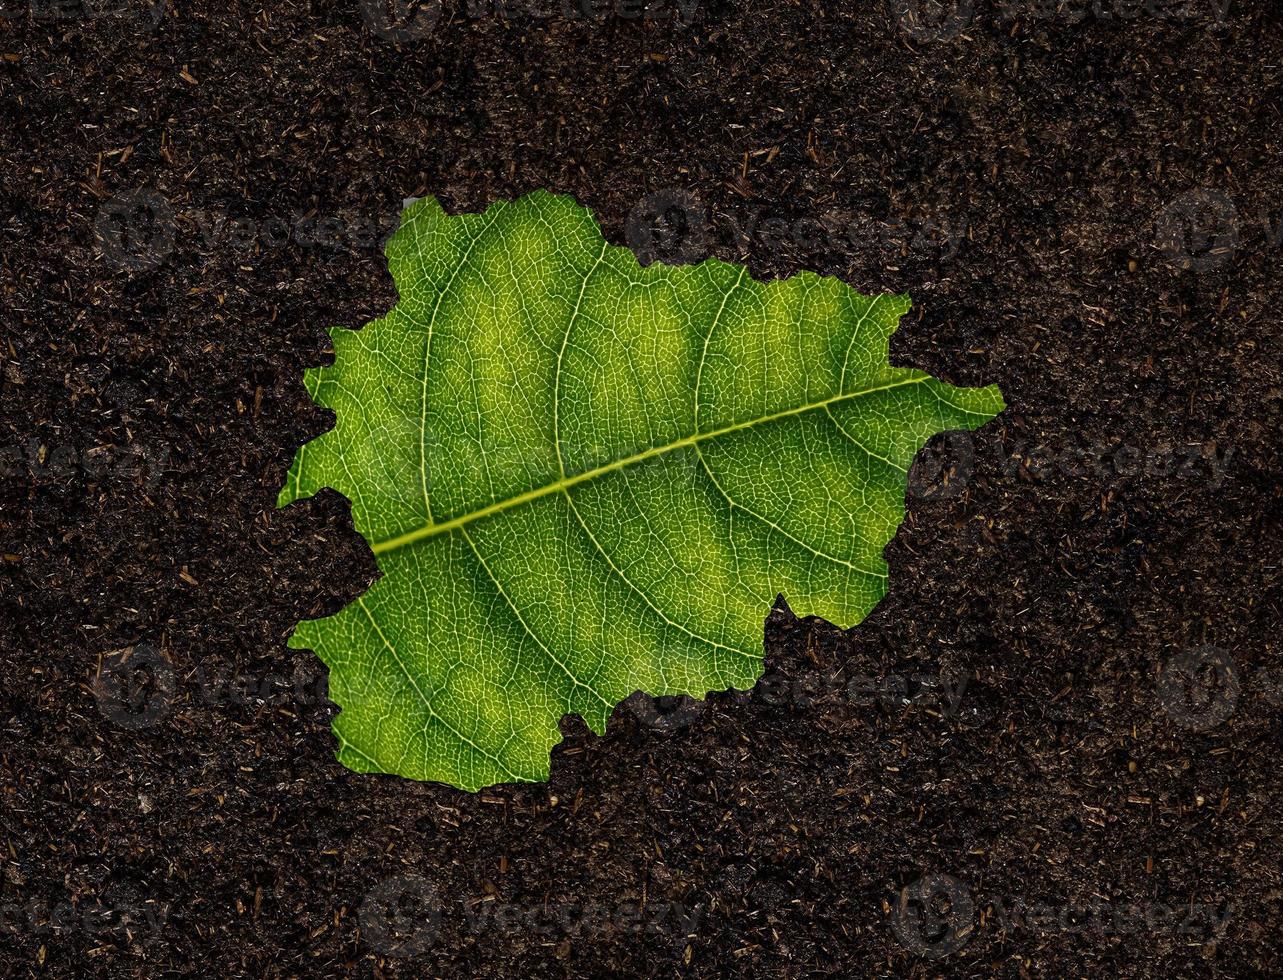 Andorra map made of green leaves on soil background ecology concept photo